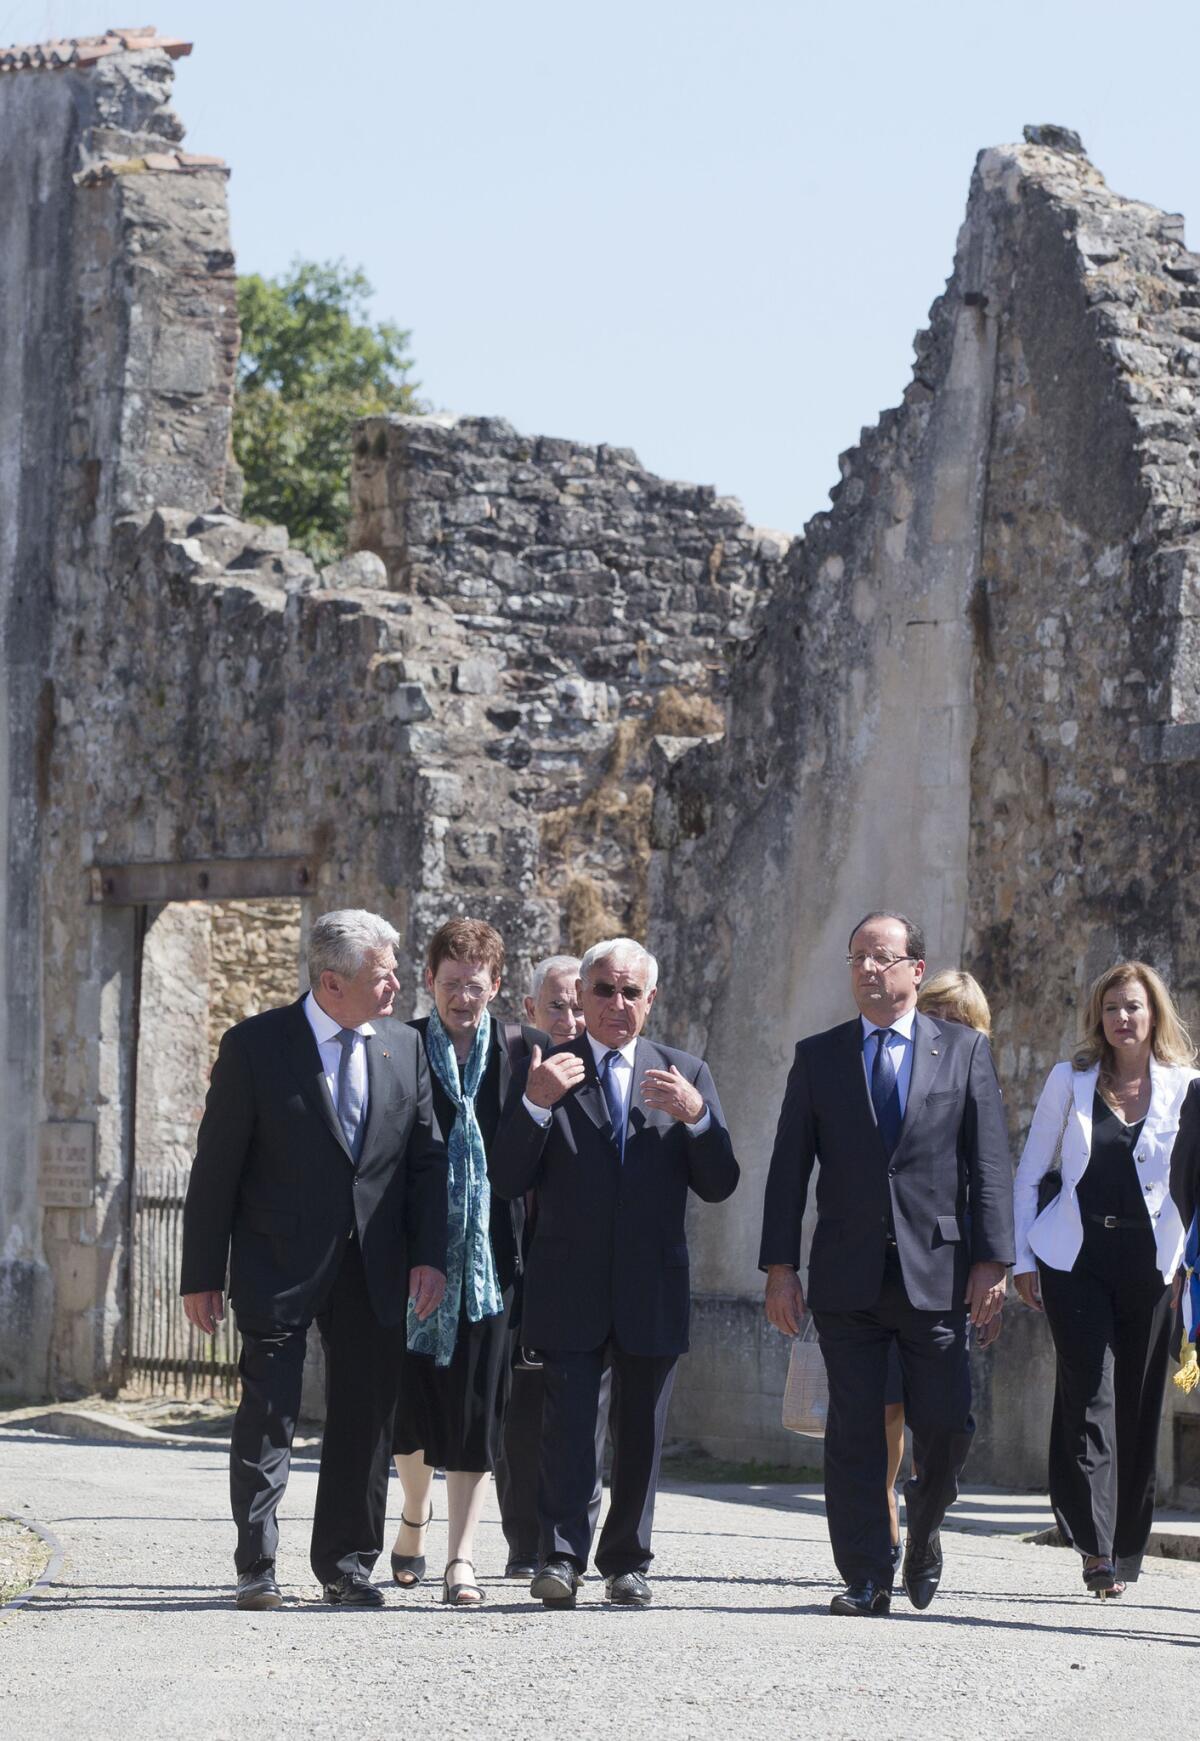 German President Joachim Gauck, left, and French President Francois Hollande, right, tour the scene of a 1944 Nazi massacre in the west-central French village of Oradour-sur-Glane with Robert Hebras, center, one of the few survivors.